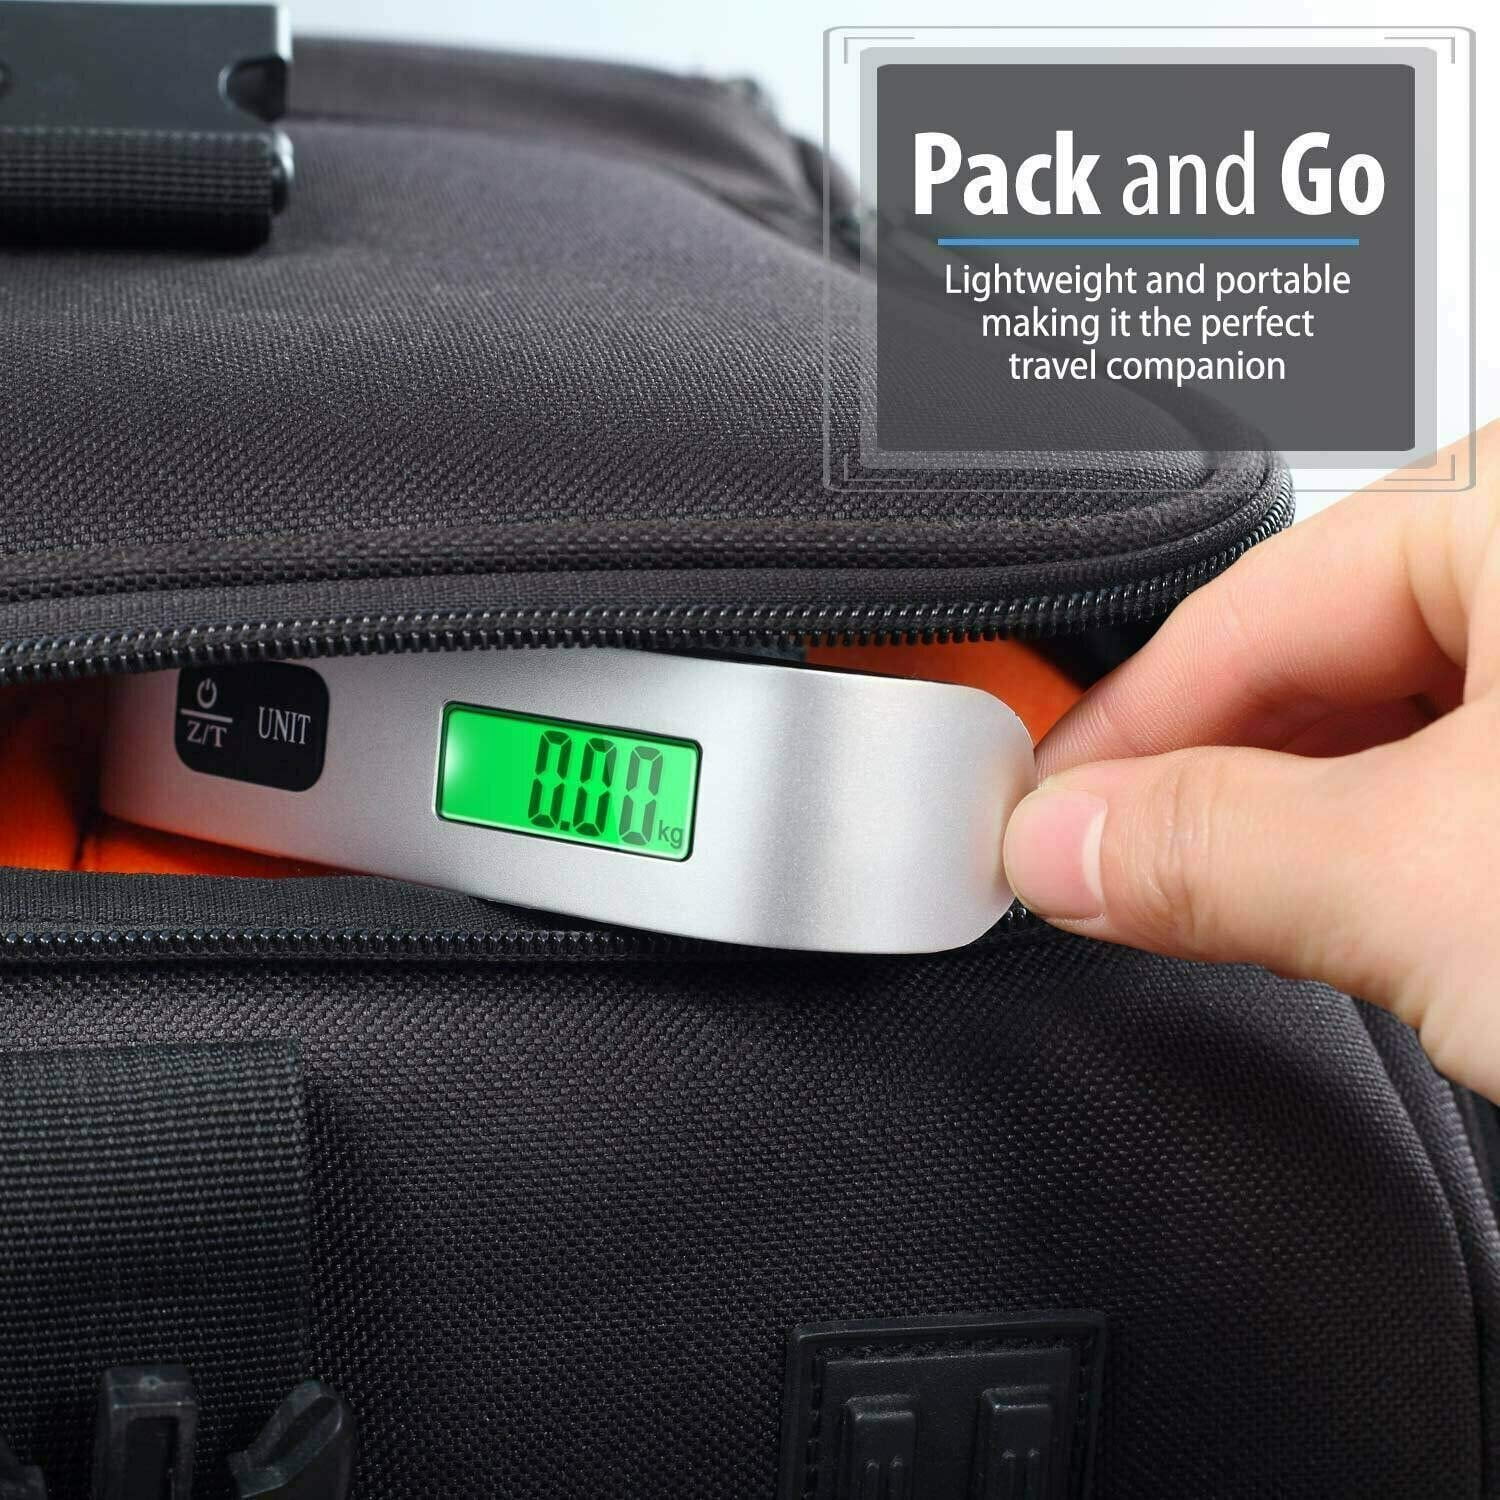 Duronic LS1013 Portable/W Luggage Scale Digital 50KG | Bag | Suitcase |  Travel | Scales Weights with Super Strong Straps